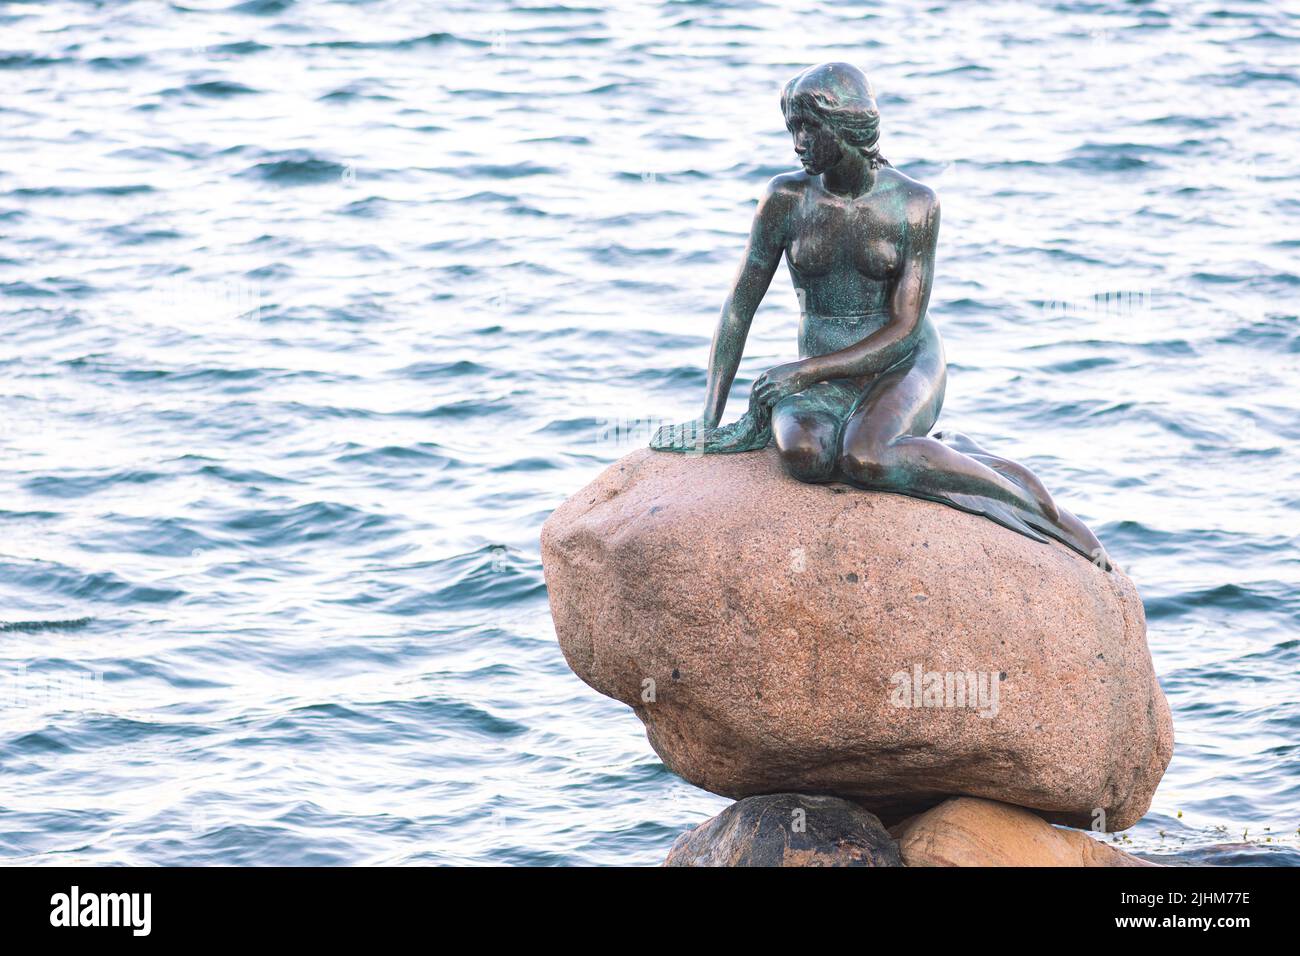 Bronze statue or sculpture of The Little Mermaid displayed on a rock by the waterside at the Langelinie promenade in Copenhagen, Denmark Stock Photo